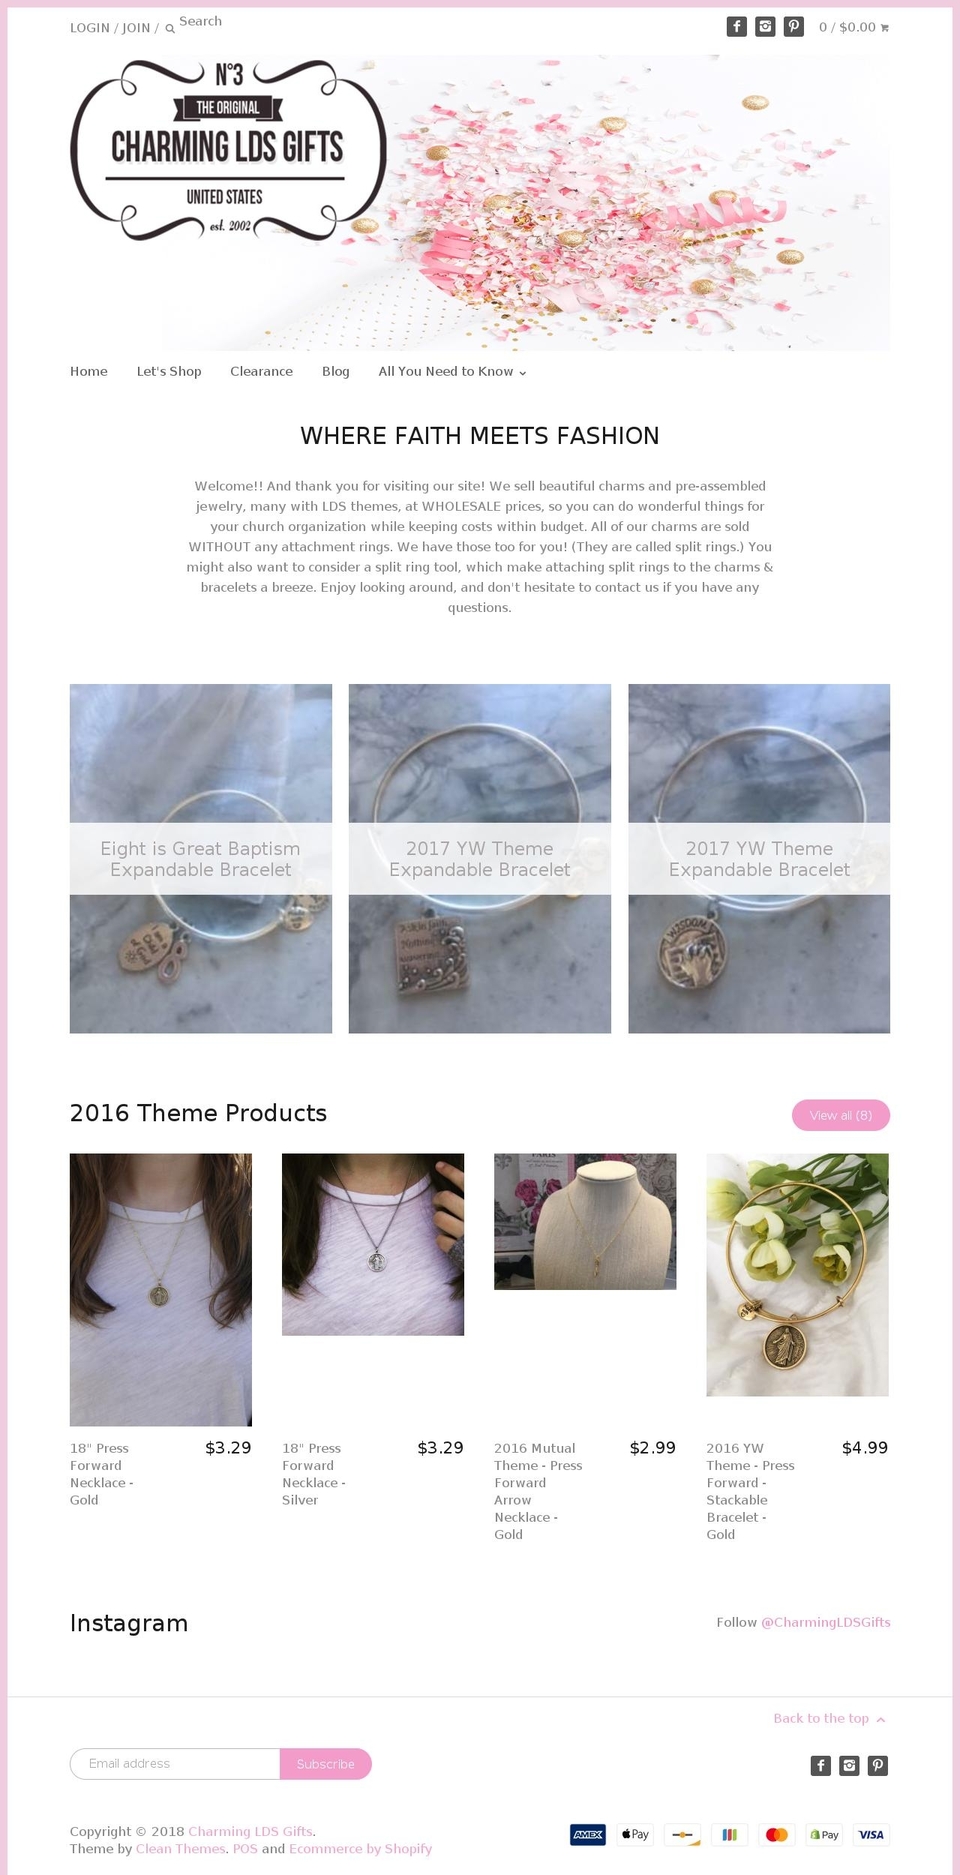 Charming LDS Gifts Shopify theme site example ldscharms.com